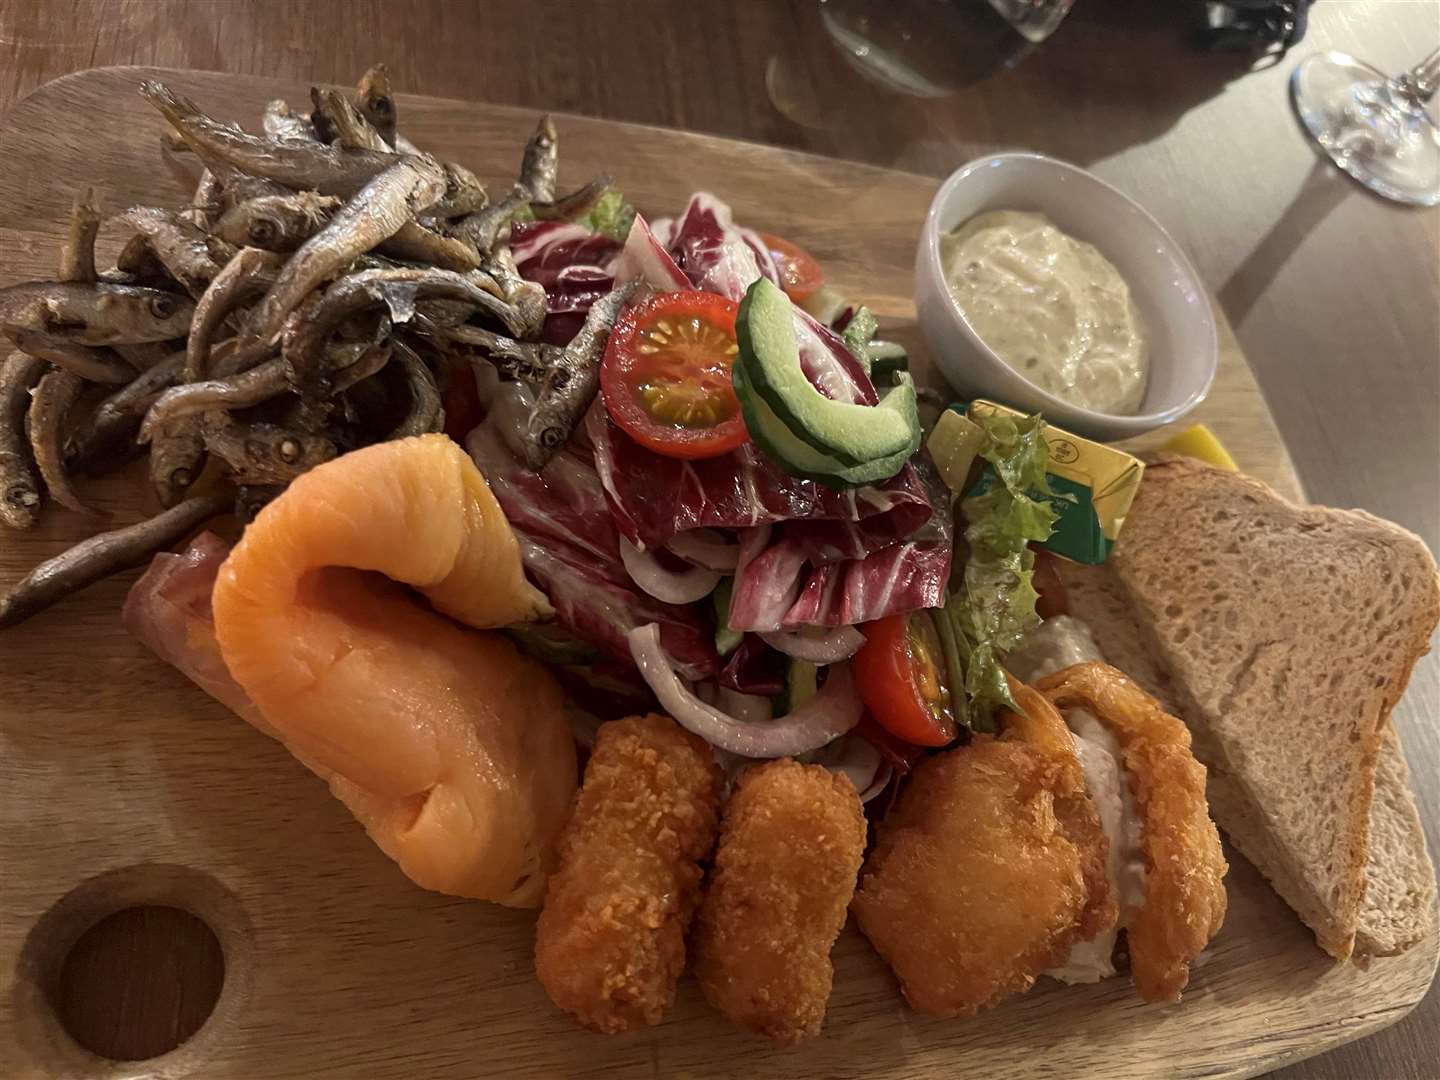 Shane's fish platter including scampi, smoked salmon, breaded butterfly king prawns, whitebait, mackerel pate, tartare sauce, rye bread and mixed house salad (£13.95)